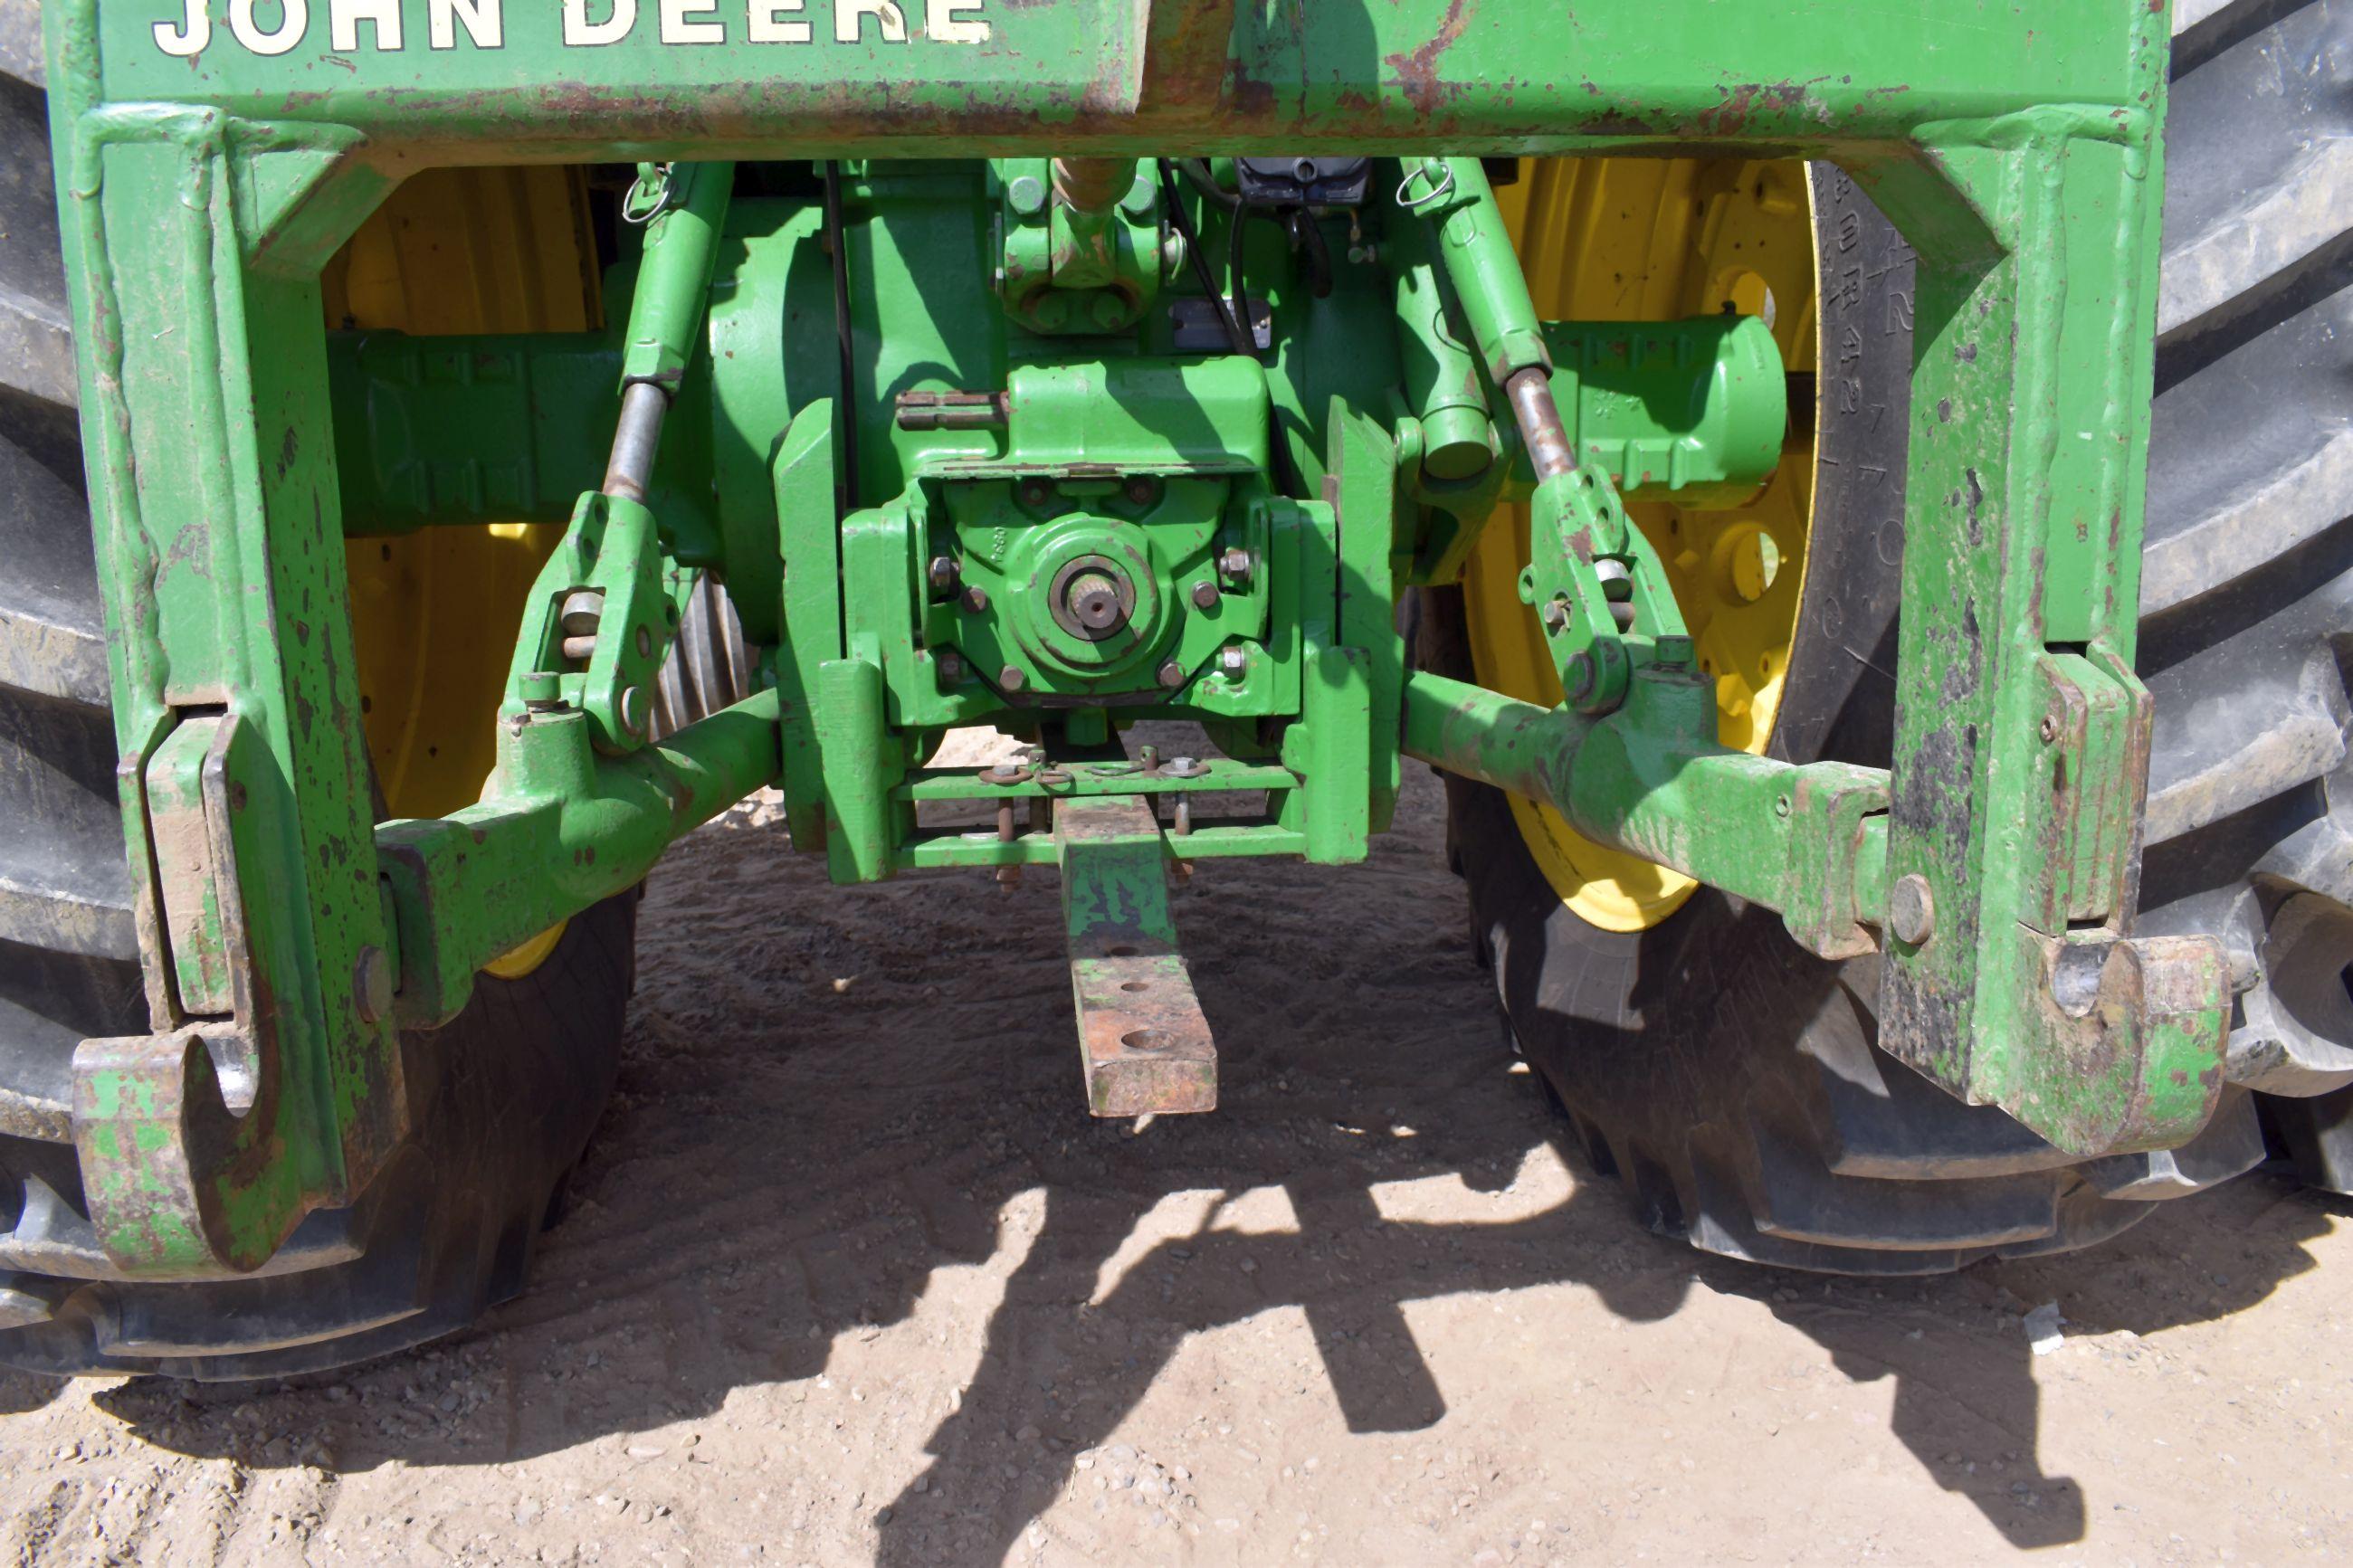 1992 John Deere 4455 2WD Tractor, 6467 Hours, 480/80R42 Duals At 90%, 11 Front Weights, LED Lights,